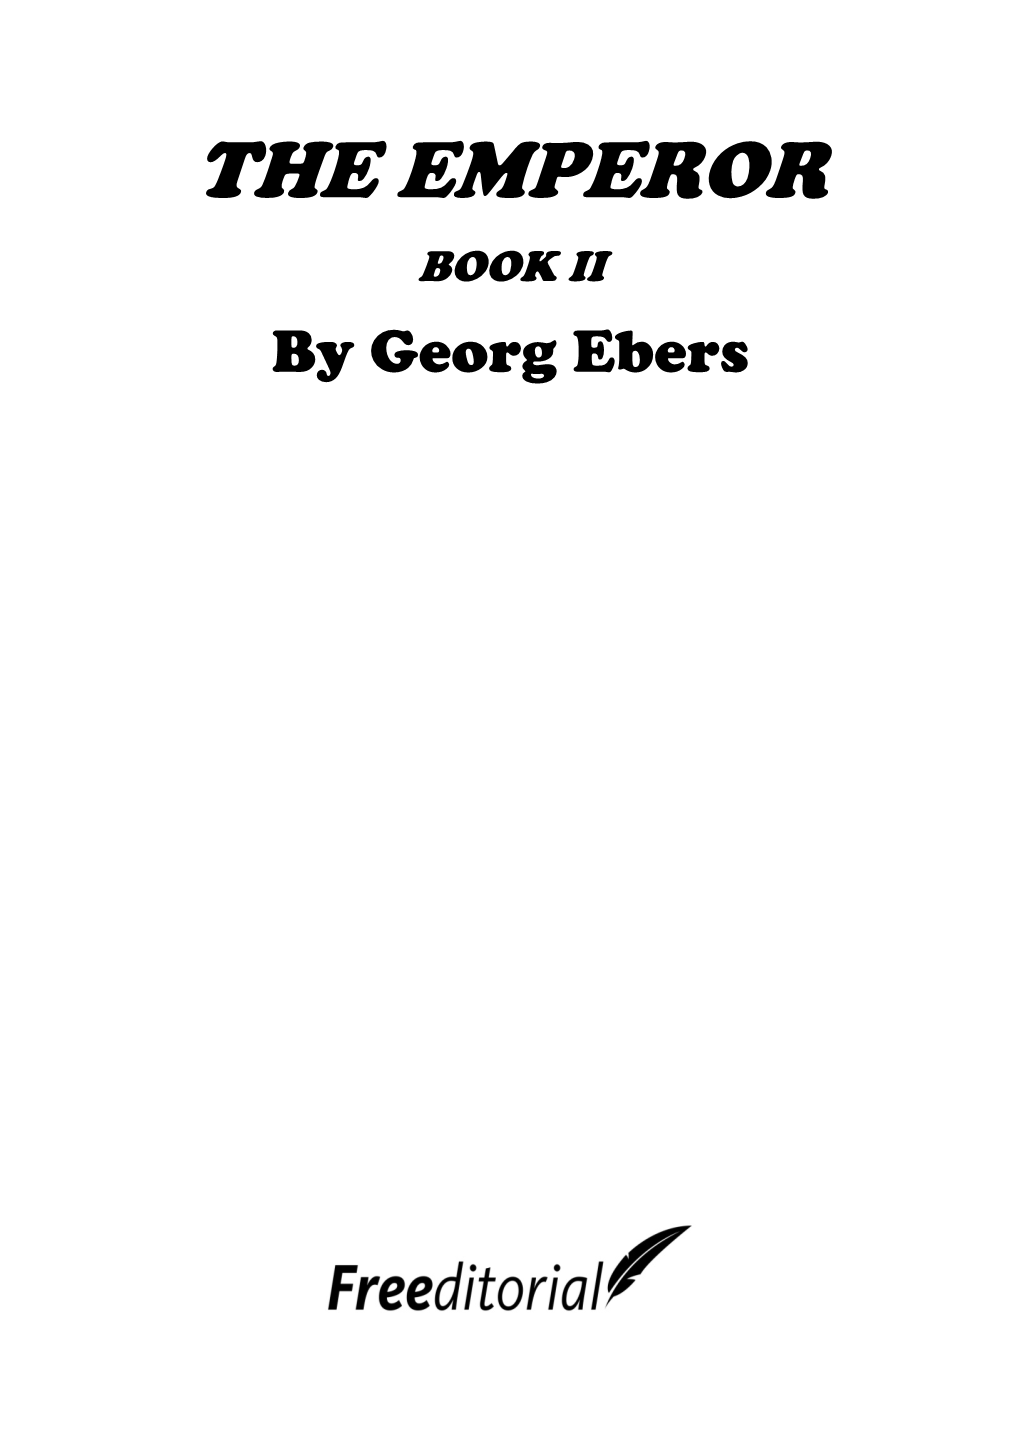 THE EMPEROR BOOK II by Georg Ebers